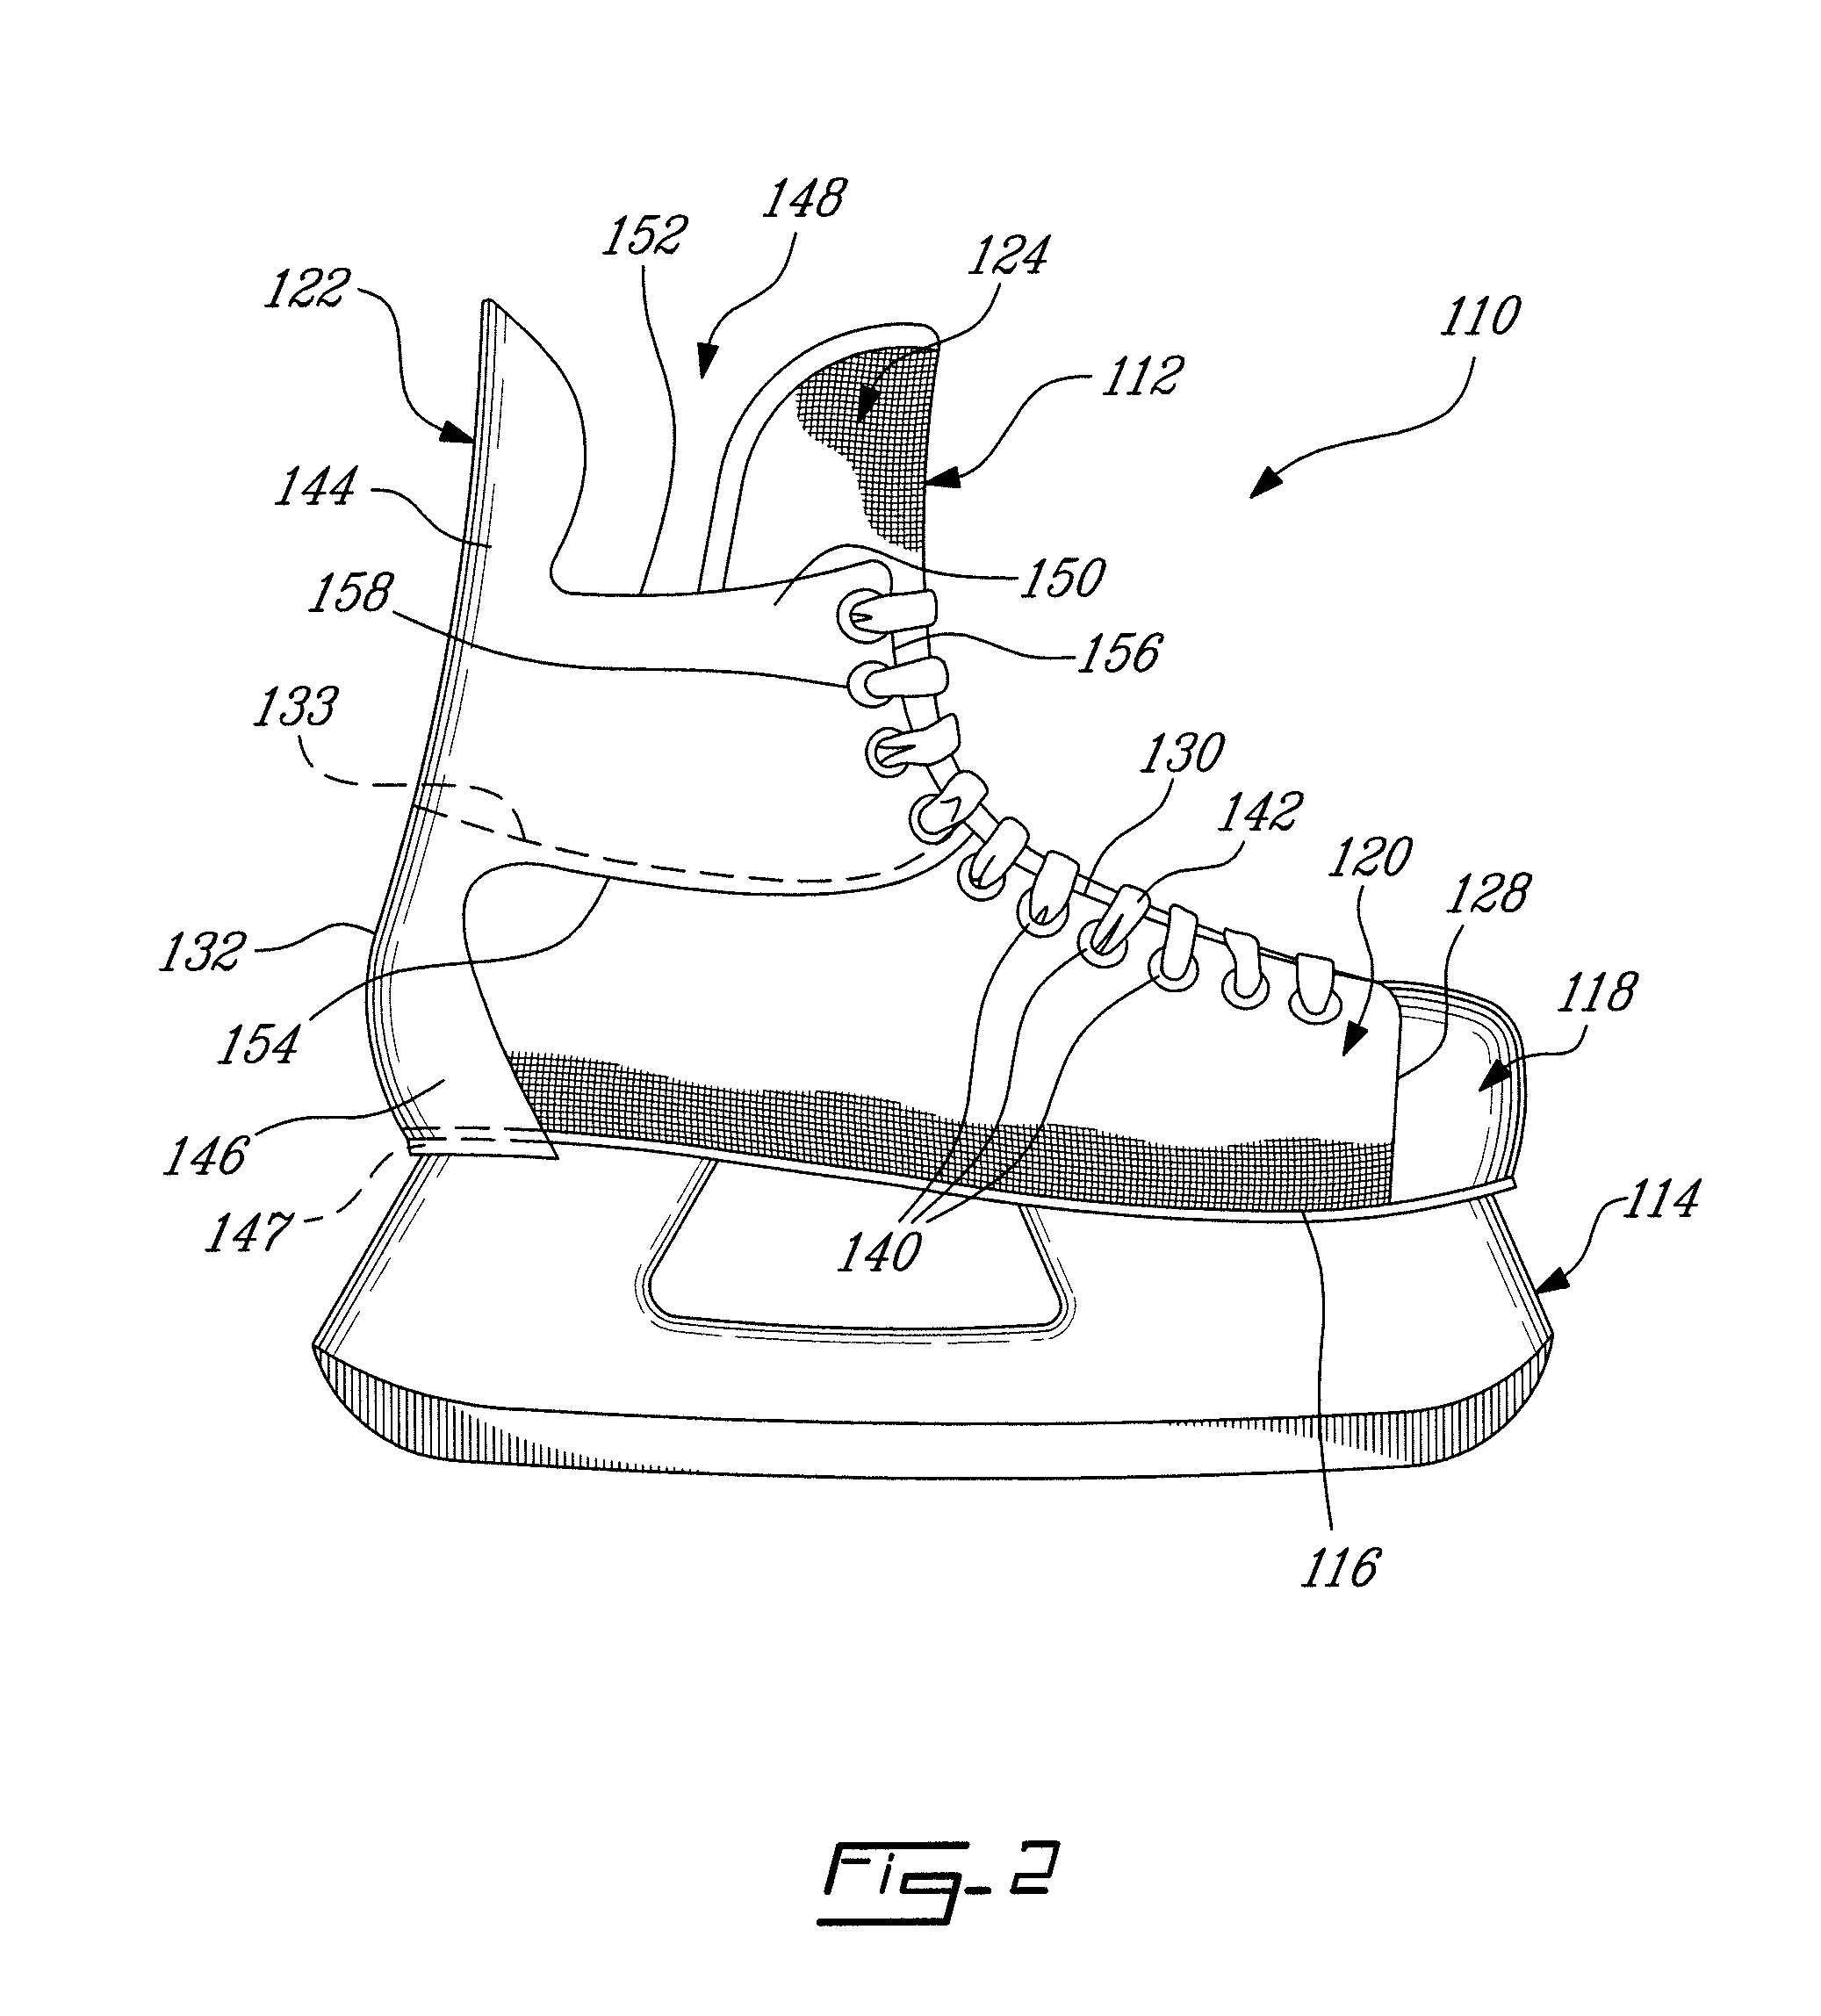 Skate boot with improved flexibility